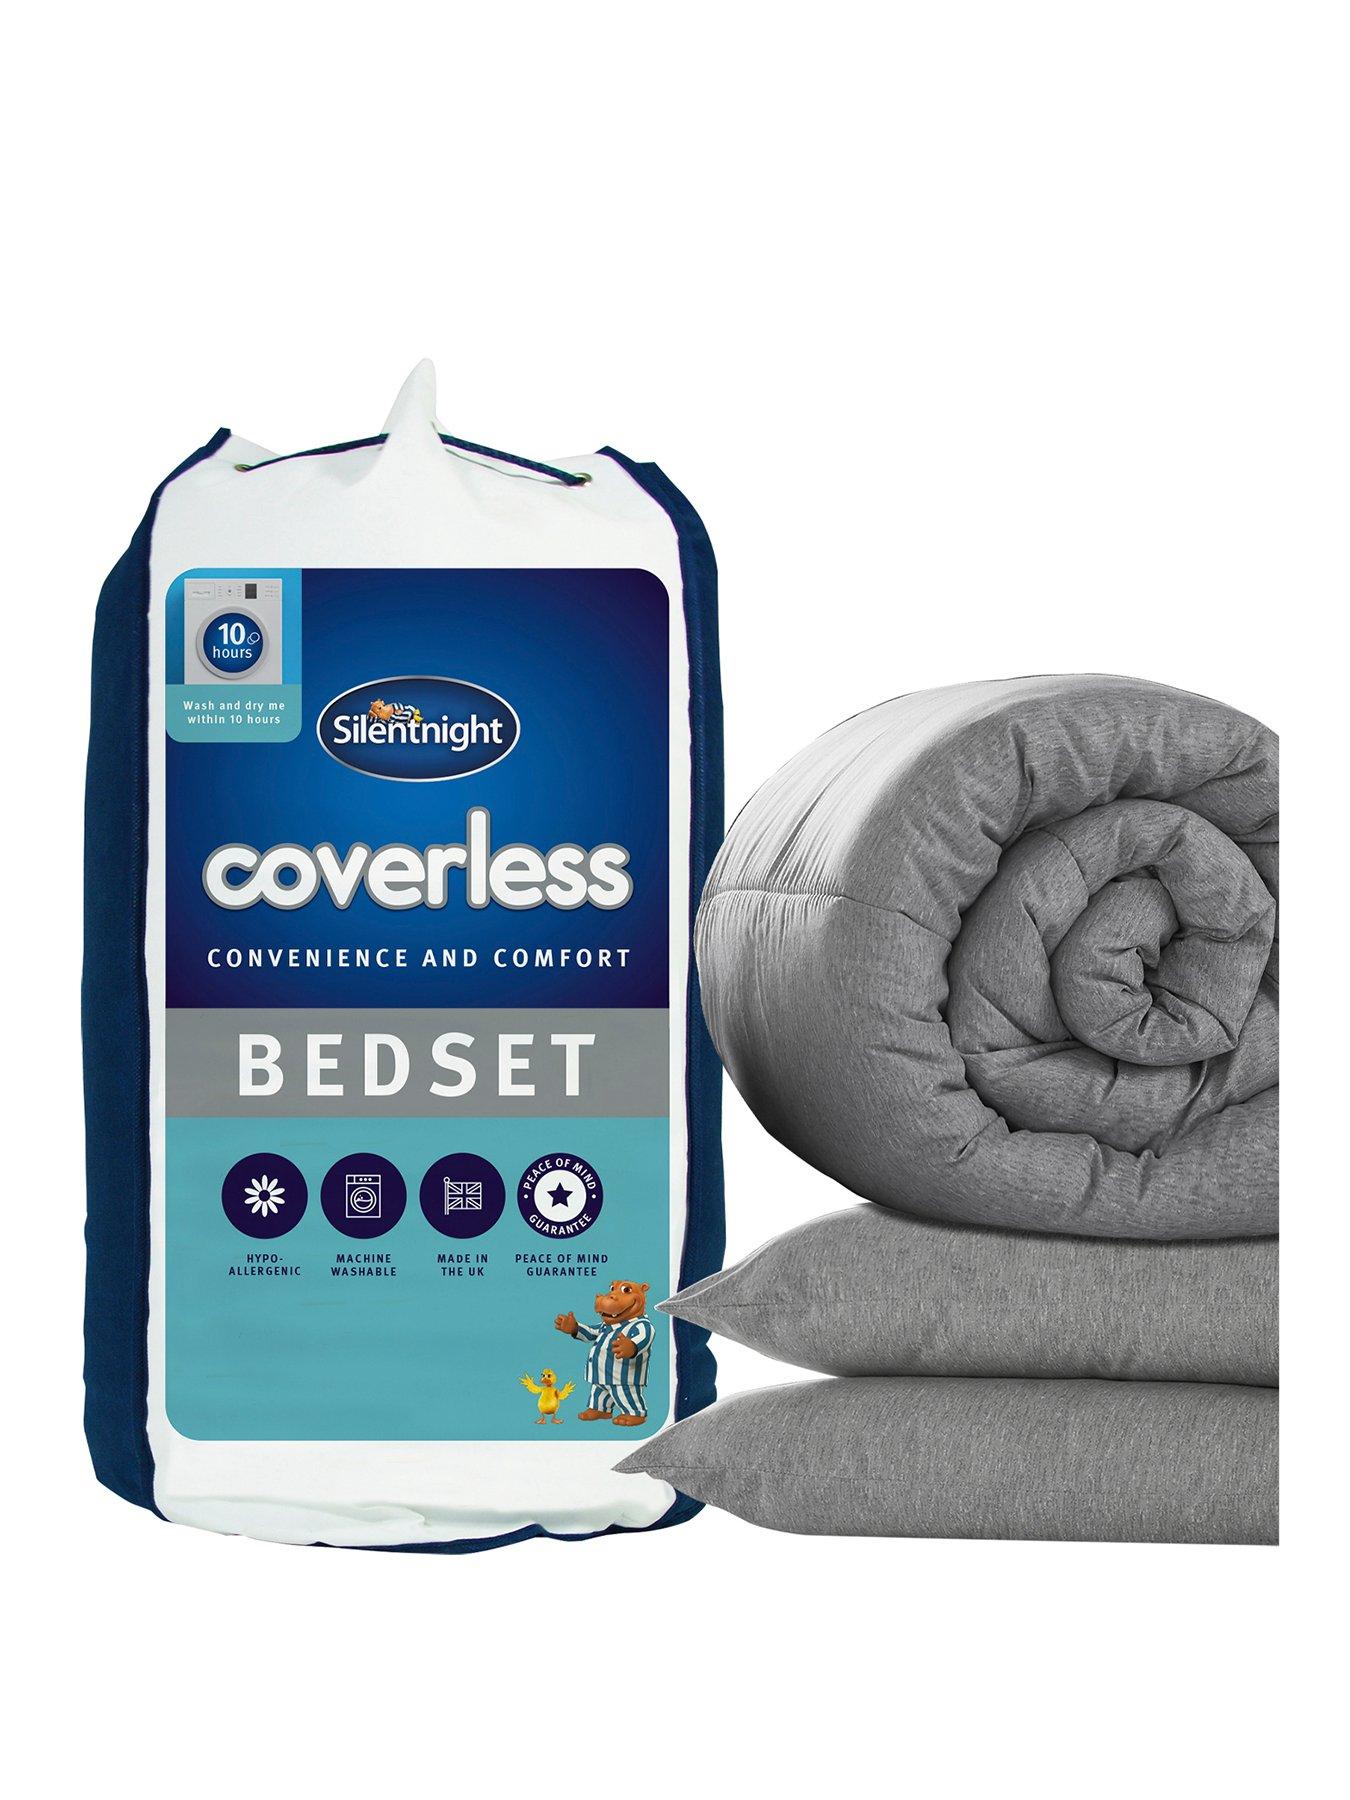 Silentnight No Cover Needed Washable 10 5 Tog Duvet And Pillow Set